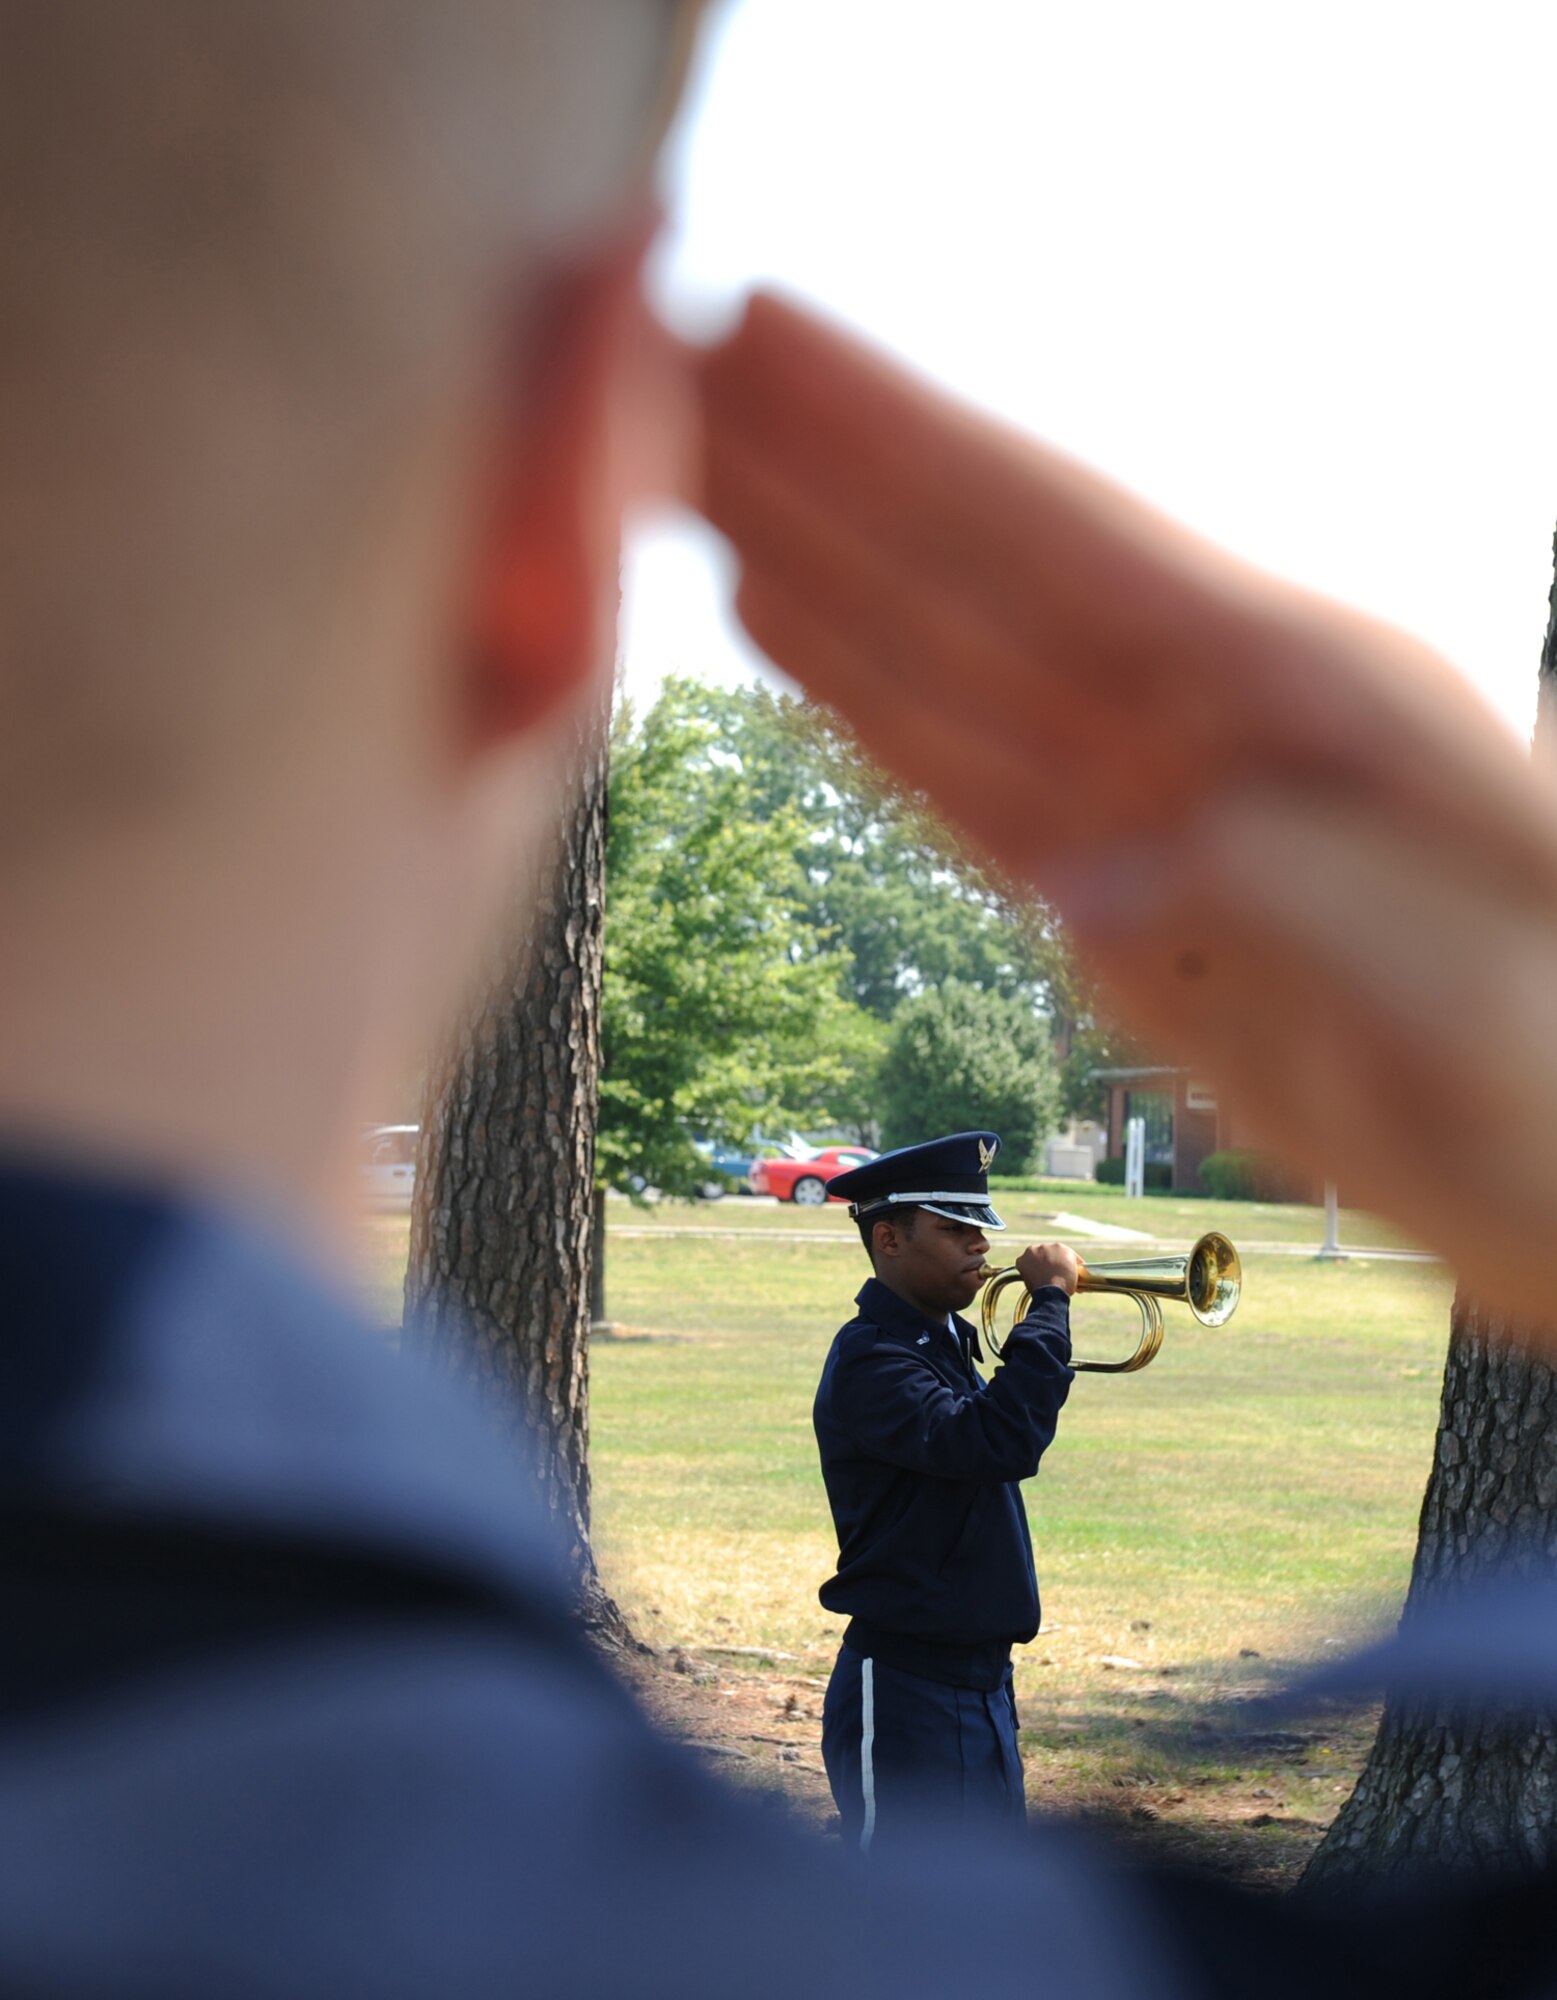 SEYMOUR JOHNSON AIR FORCE BASE, N.C.-Airman 1st Class Joseph Perry, base honor guard member, salutes while Airman 1st Class Marcus Smith plays "Taps" during a funeral drill practice on June 24. The Airmen practice every day to ensure their performance is at its peak.(U.S. Air Force photo by Airman 1st Class Whitney Stanfield)